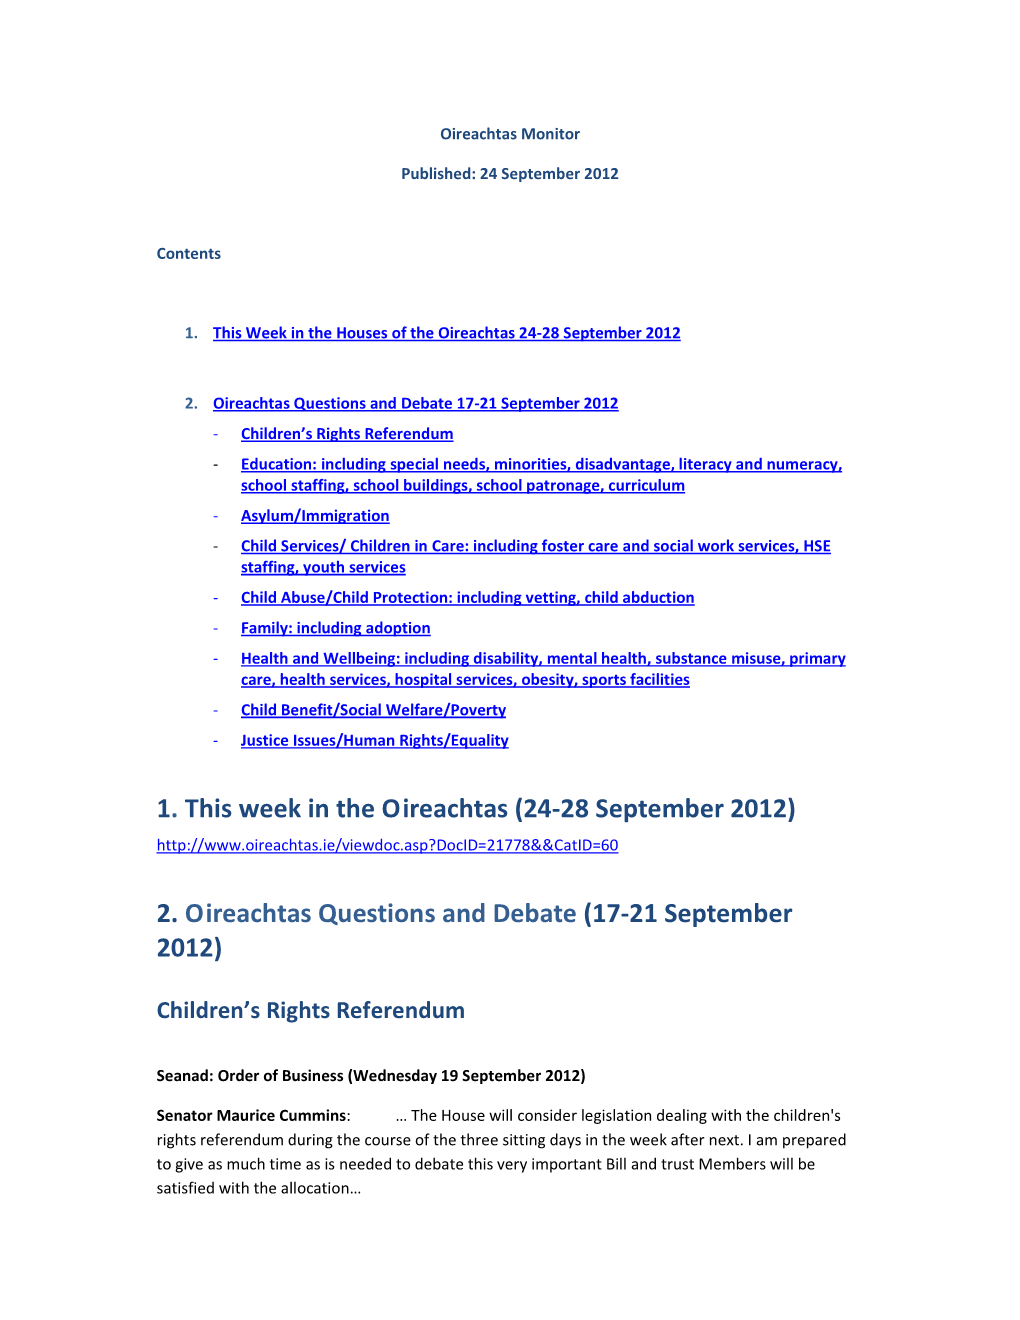 2. Oireachtas Questions and Debate (17-21 September 2012)